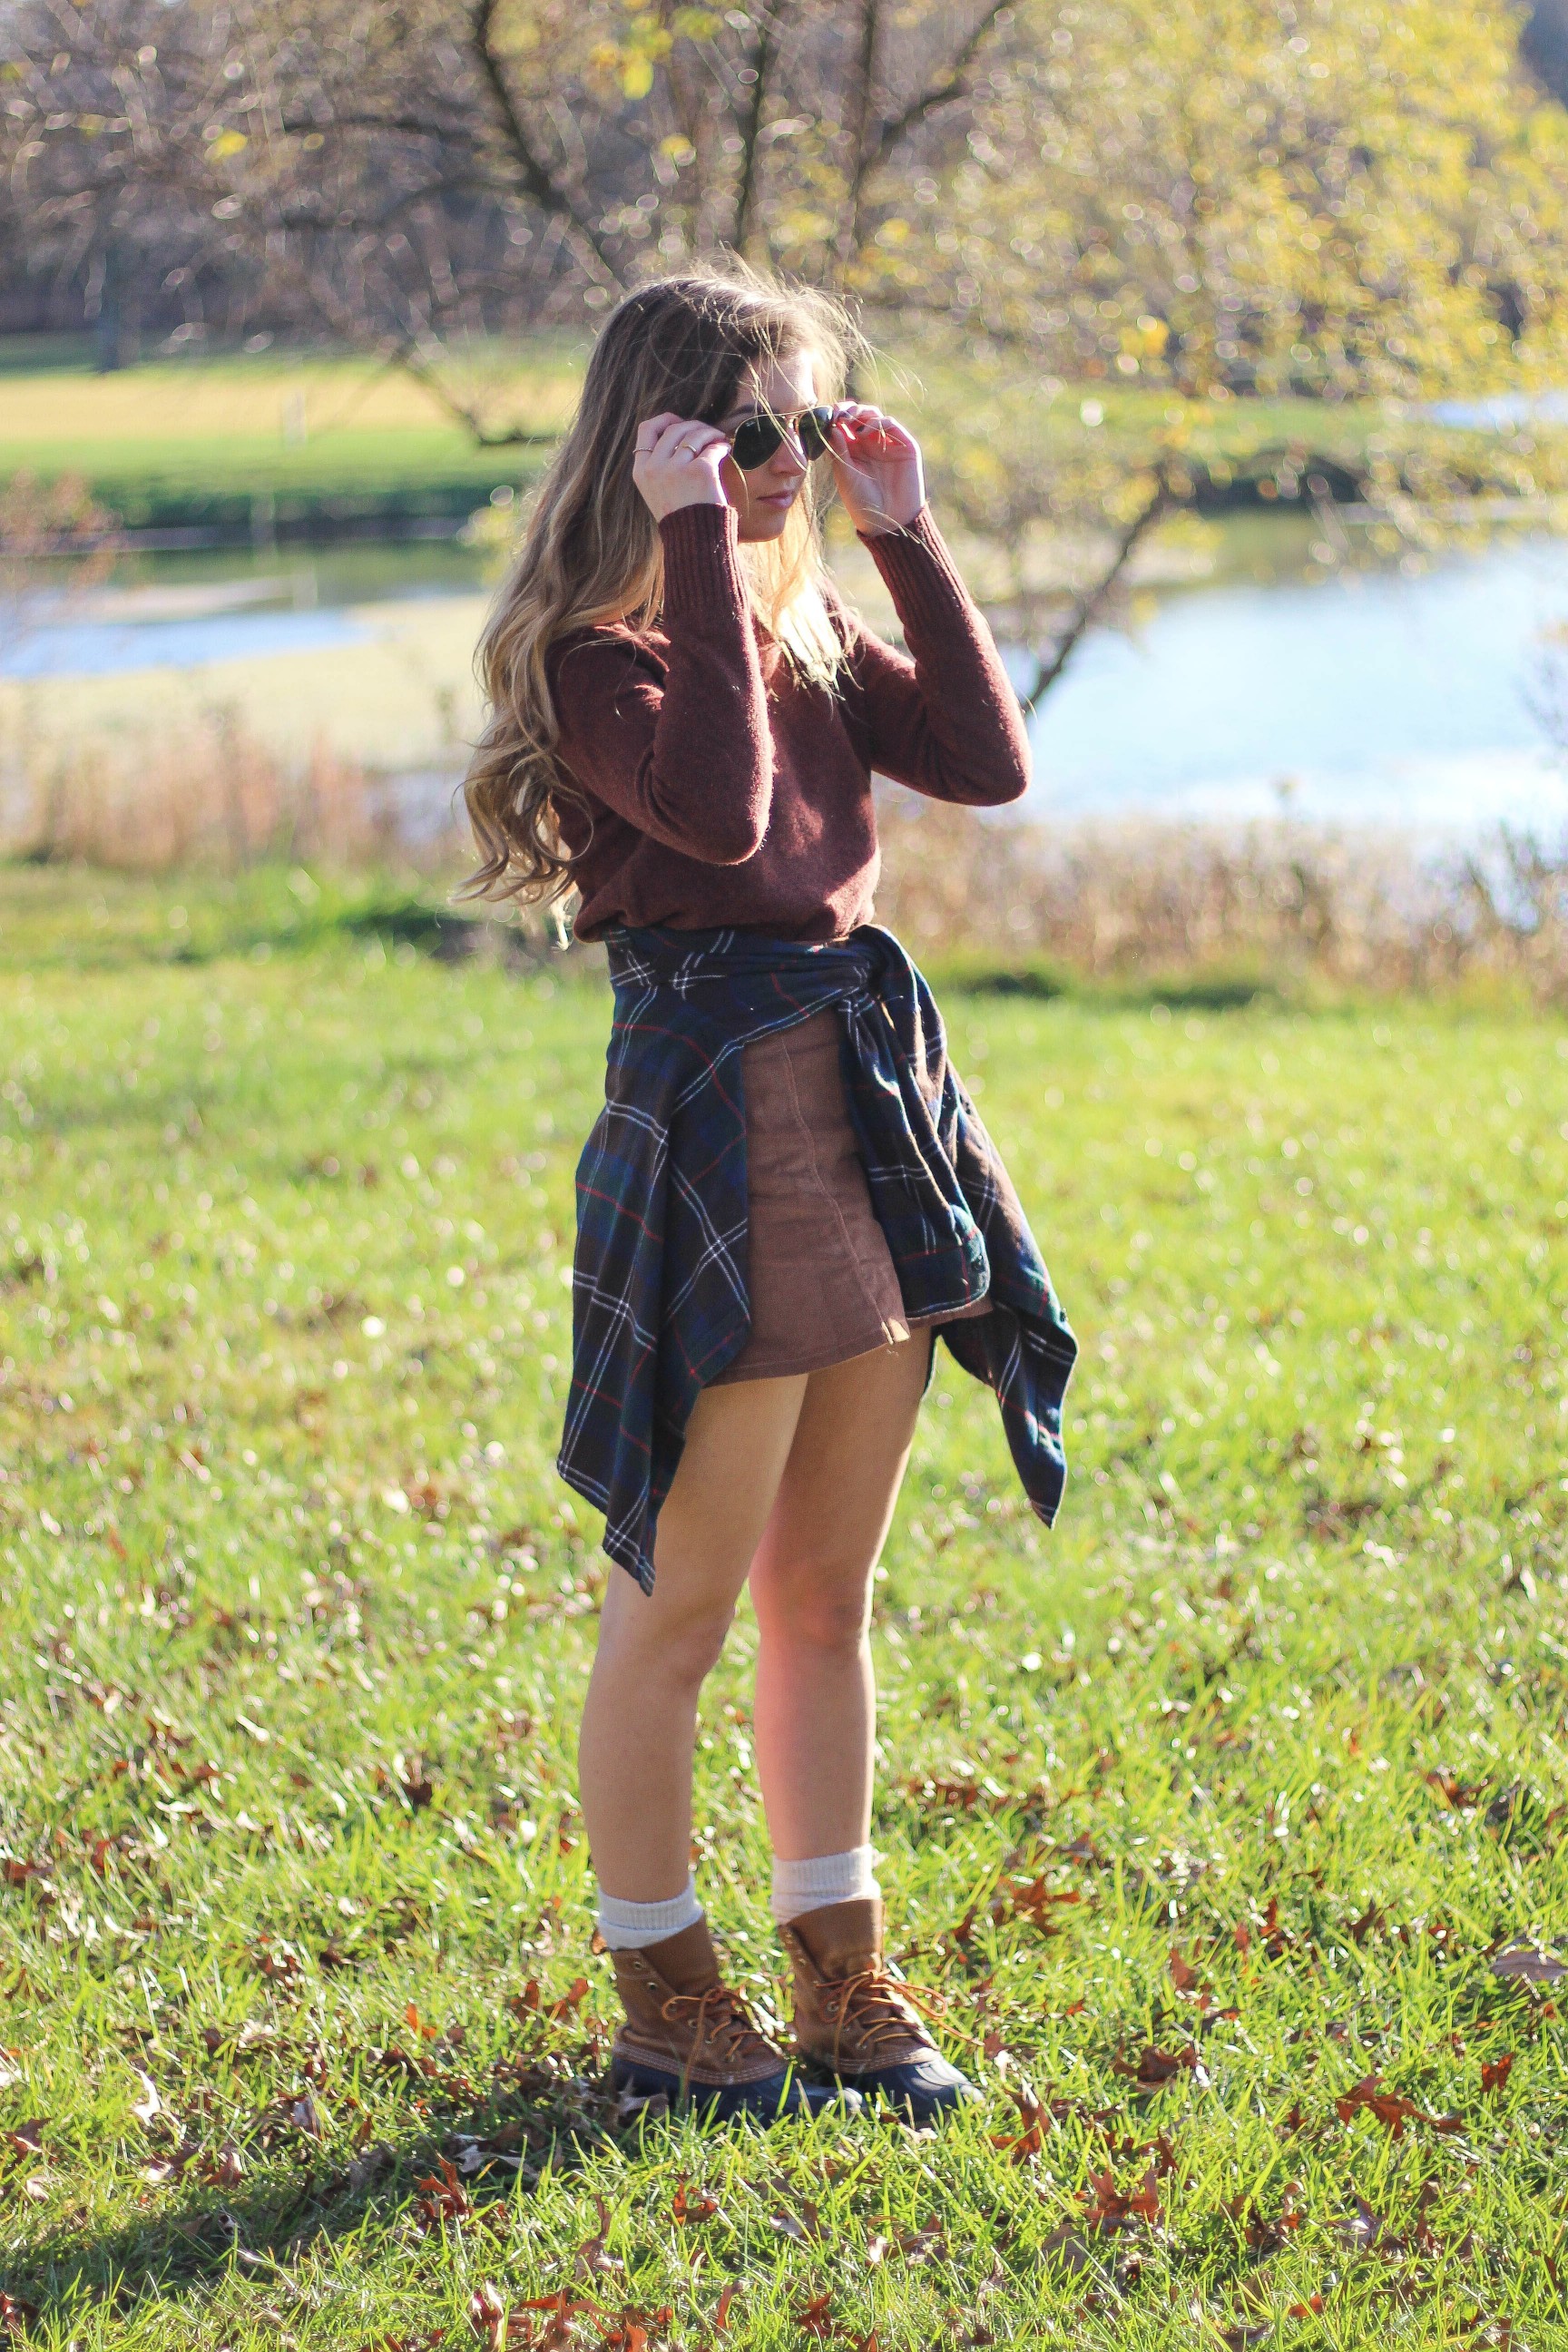 The perfect fall outfit! The corduroy skirt is showing up everywhere so I decided to pair it with a flannel to be a bit different. Of course I added a burgundy sweater because it's my favorite color for fall! As for my boyfriend, he's rocking a JORD wooden watch that I am in love with! Cute couple pictures are my favorite, check out our poses for engagement photo ideas and more! By Lauren Lindmark on Daily Dose of Charm dailydoseofcharm.com